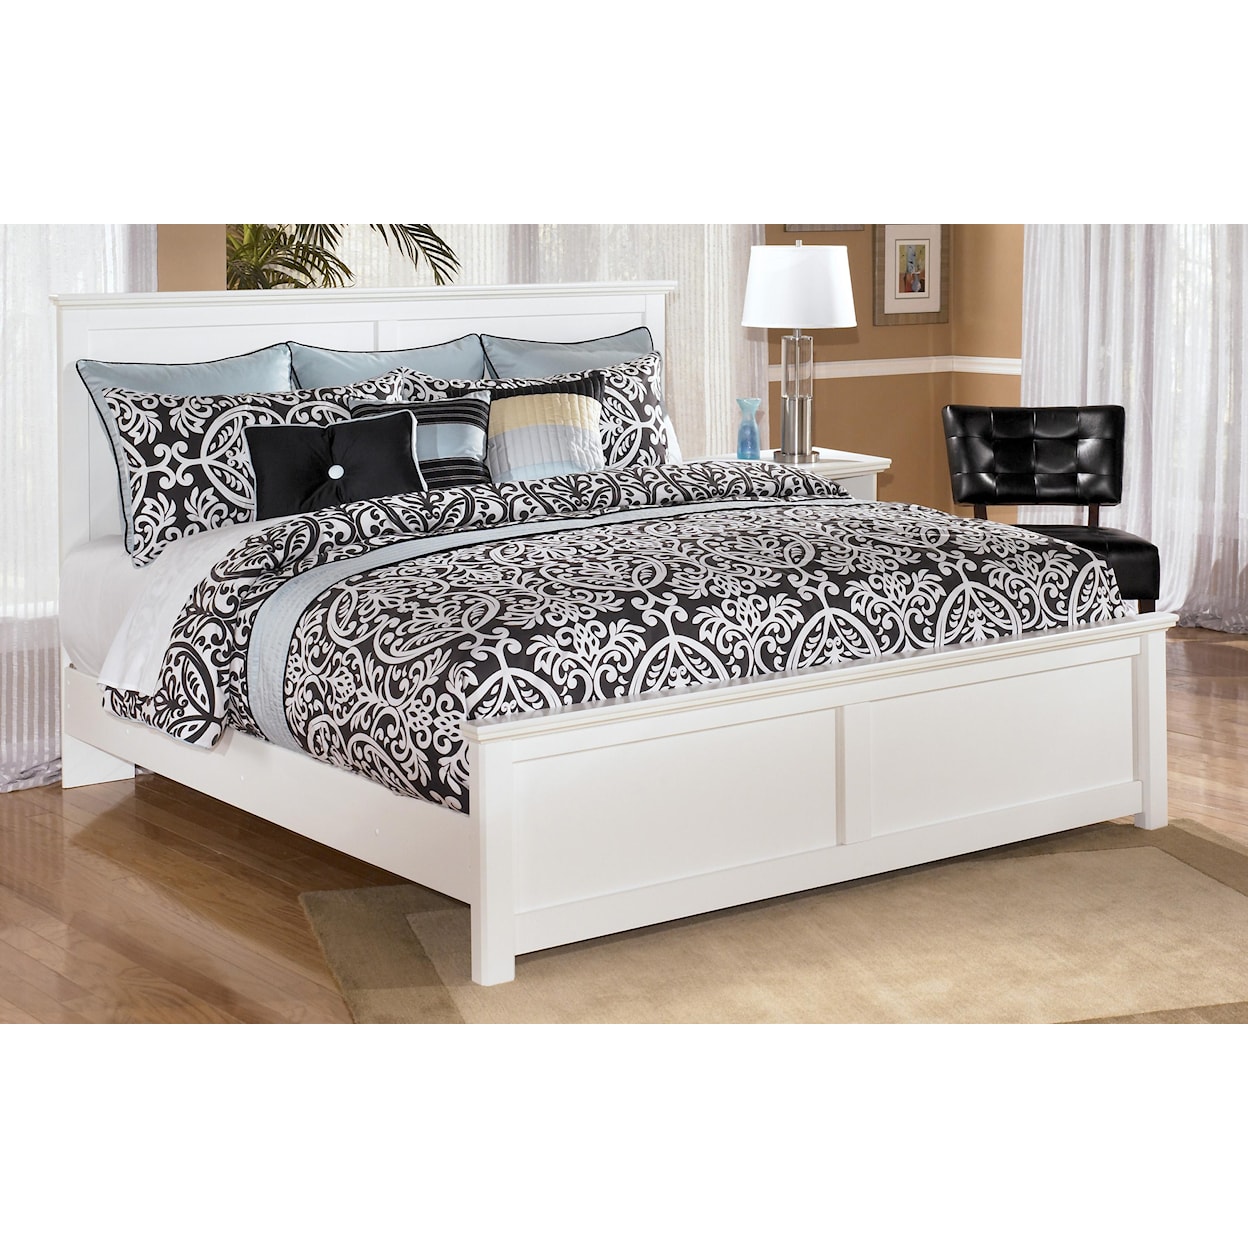 Signature Design by Ashley Bostwick Shoals King Panel Bed